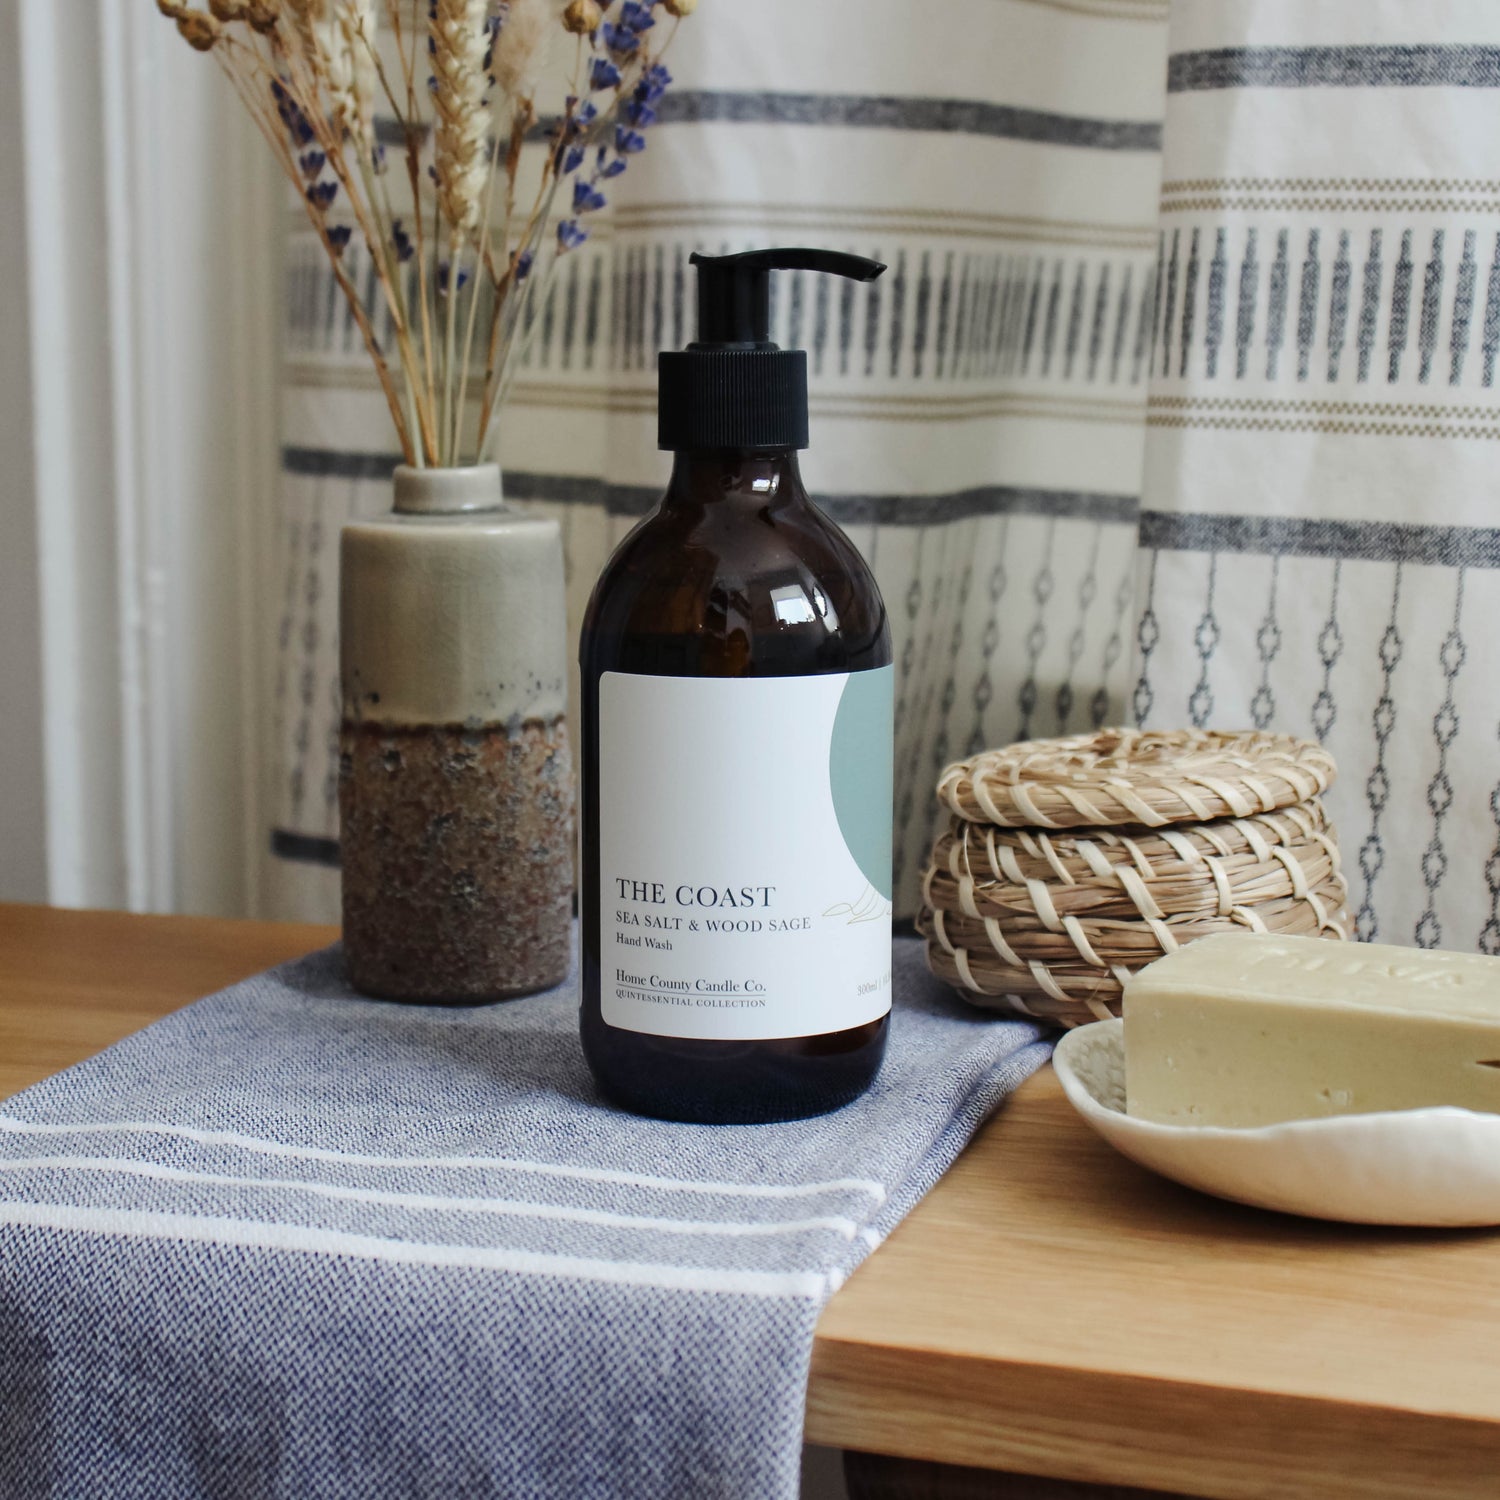 A 300ml coastal sea salt and wood sage liquid hand wash from the Home County Co. is shown in a bathroom